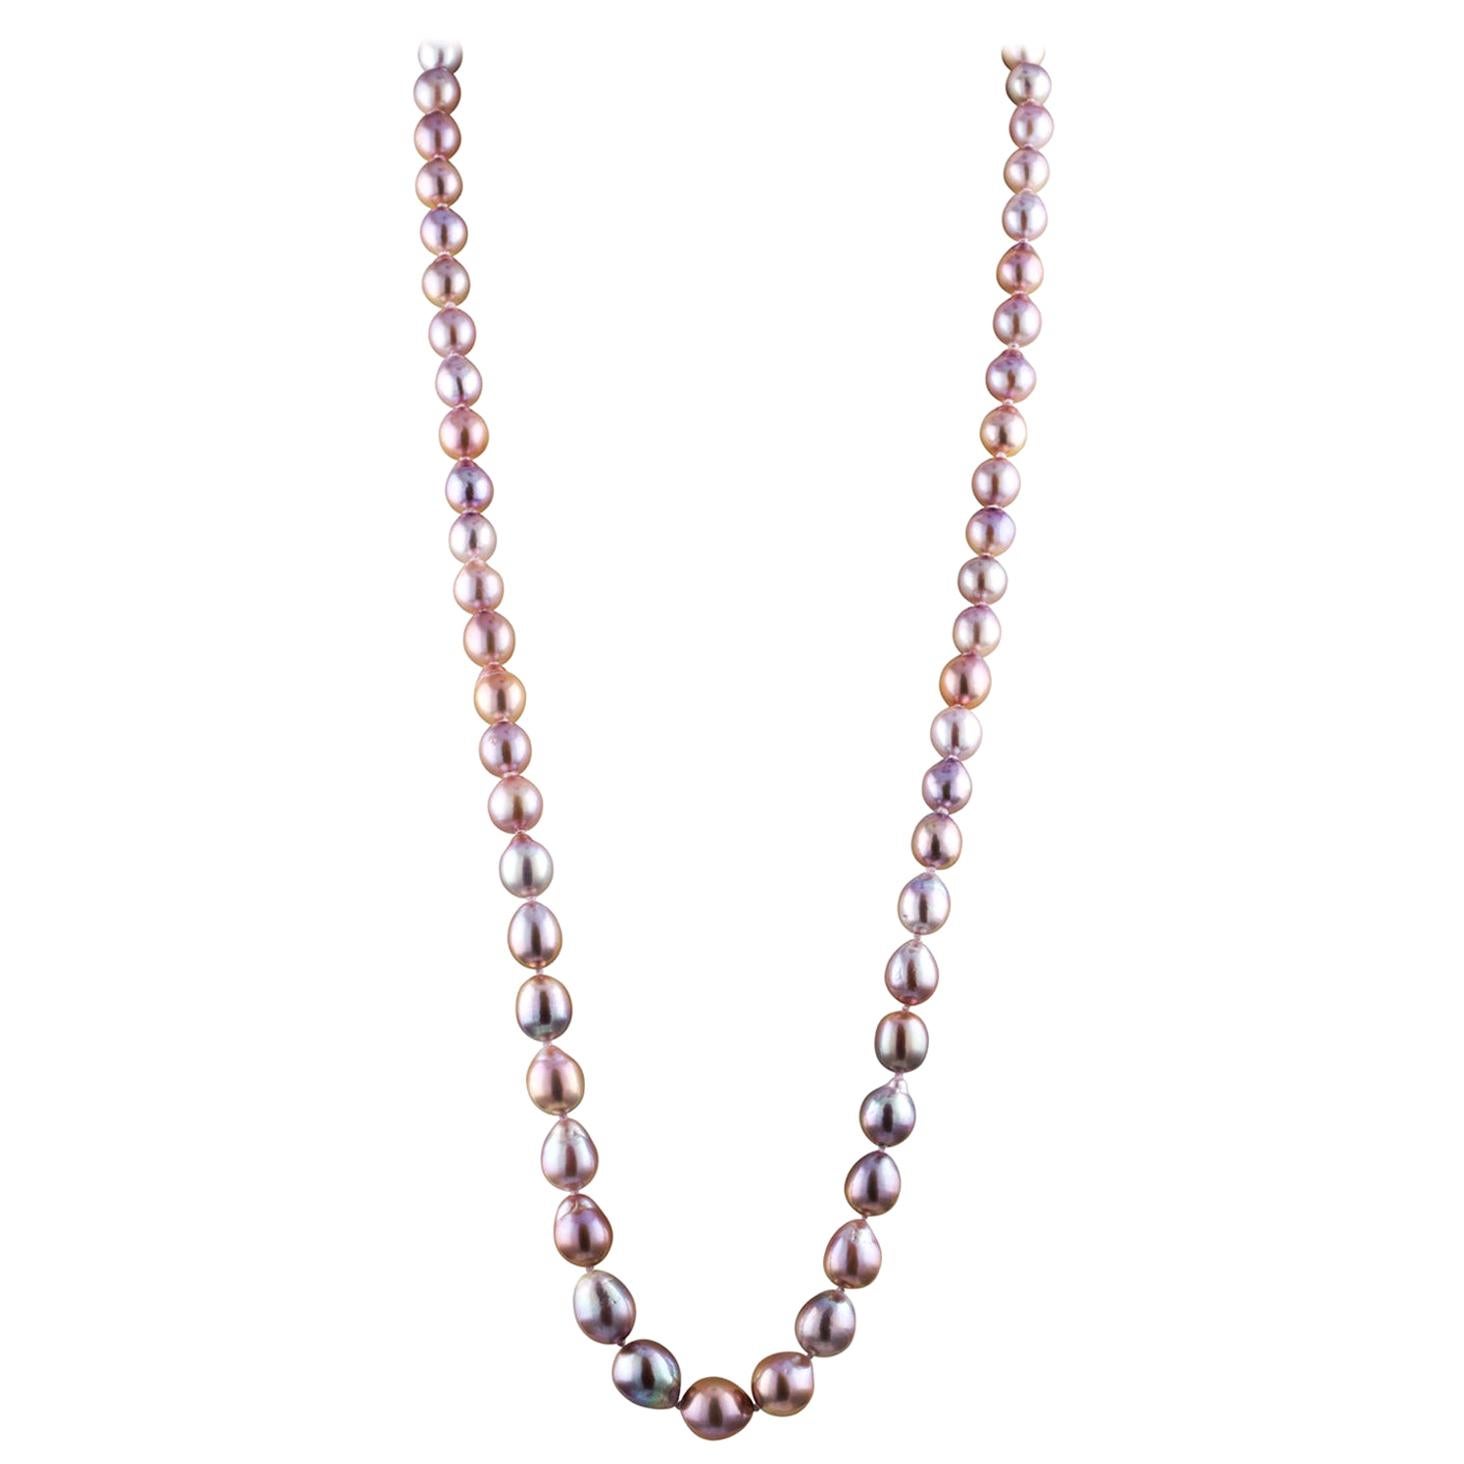 Freshwater Pink Baroque Rope Pearl Necklace with 18 Karat White Gold Clasp